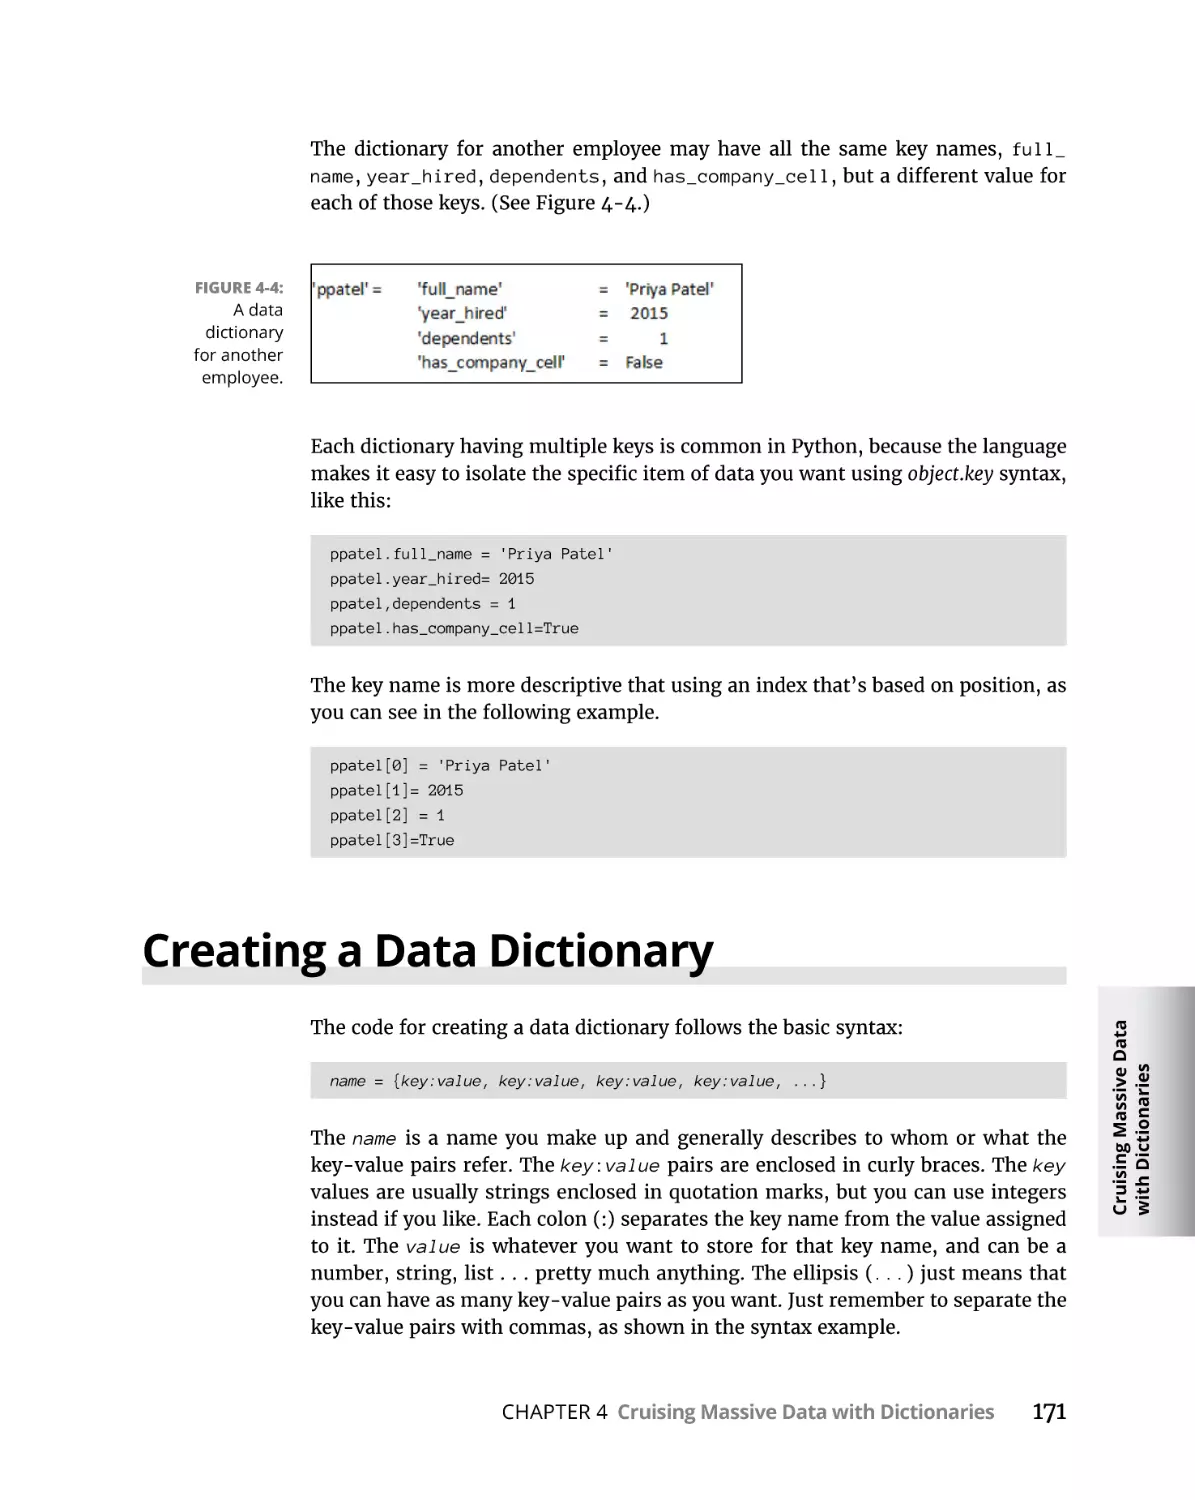 Creating a Data Dictionary